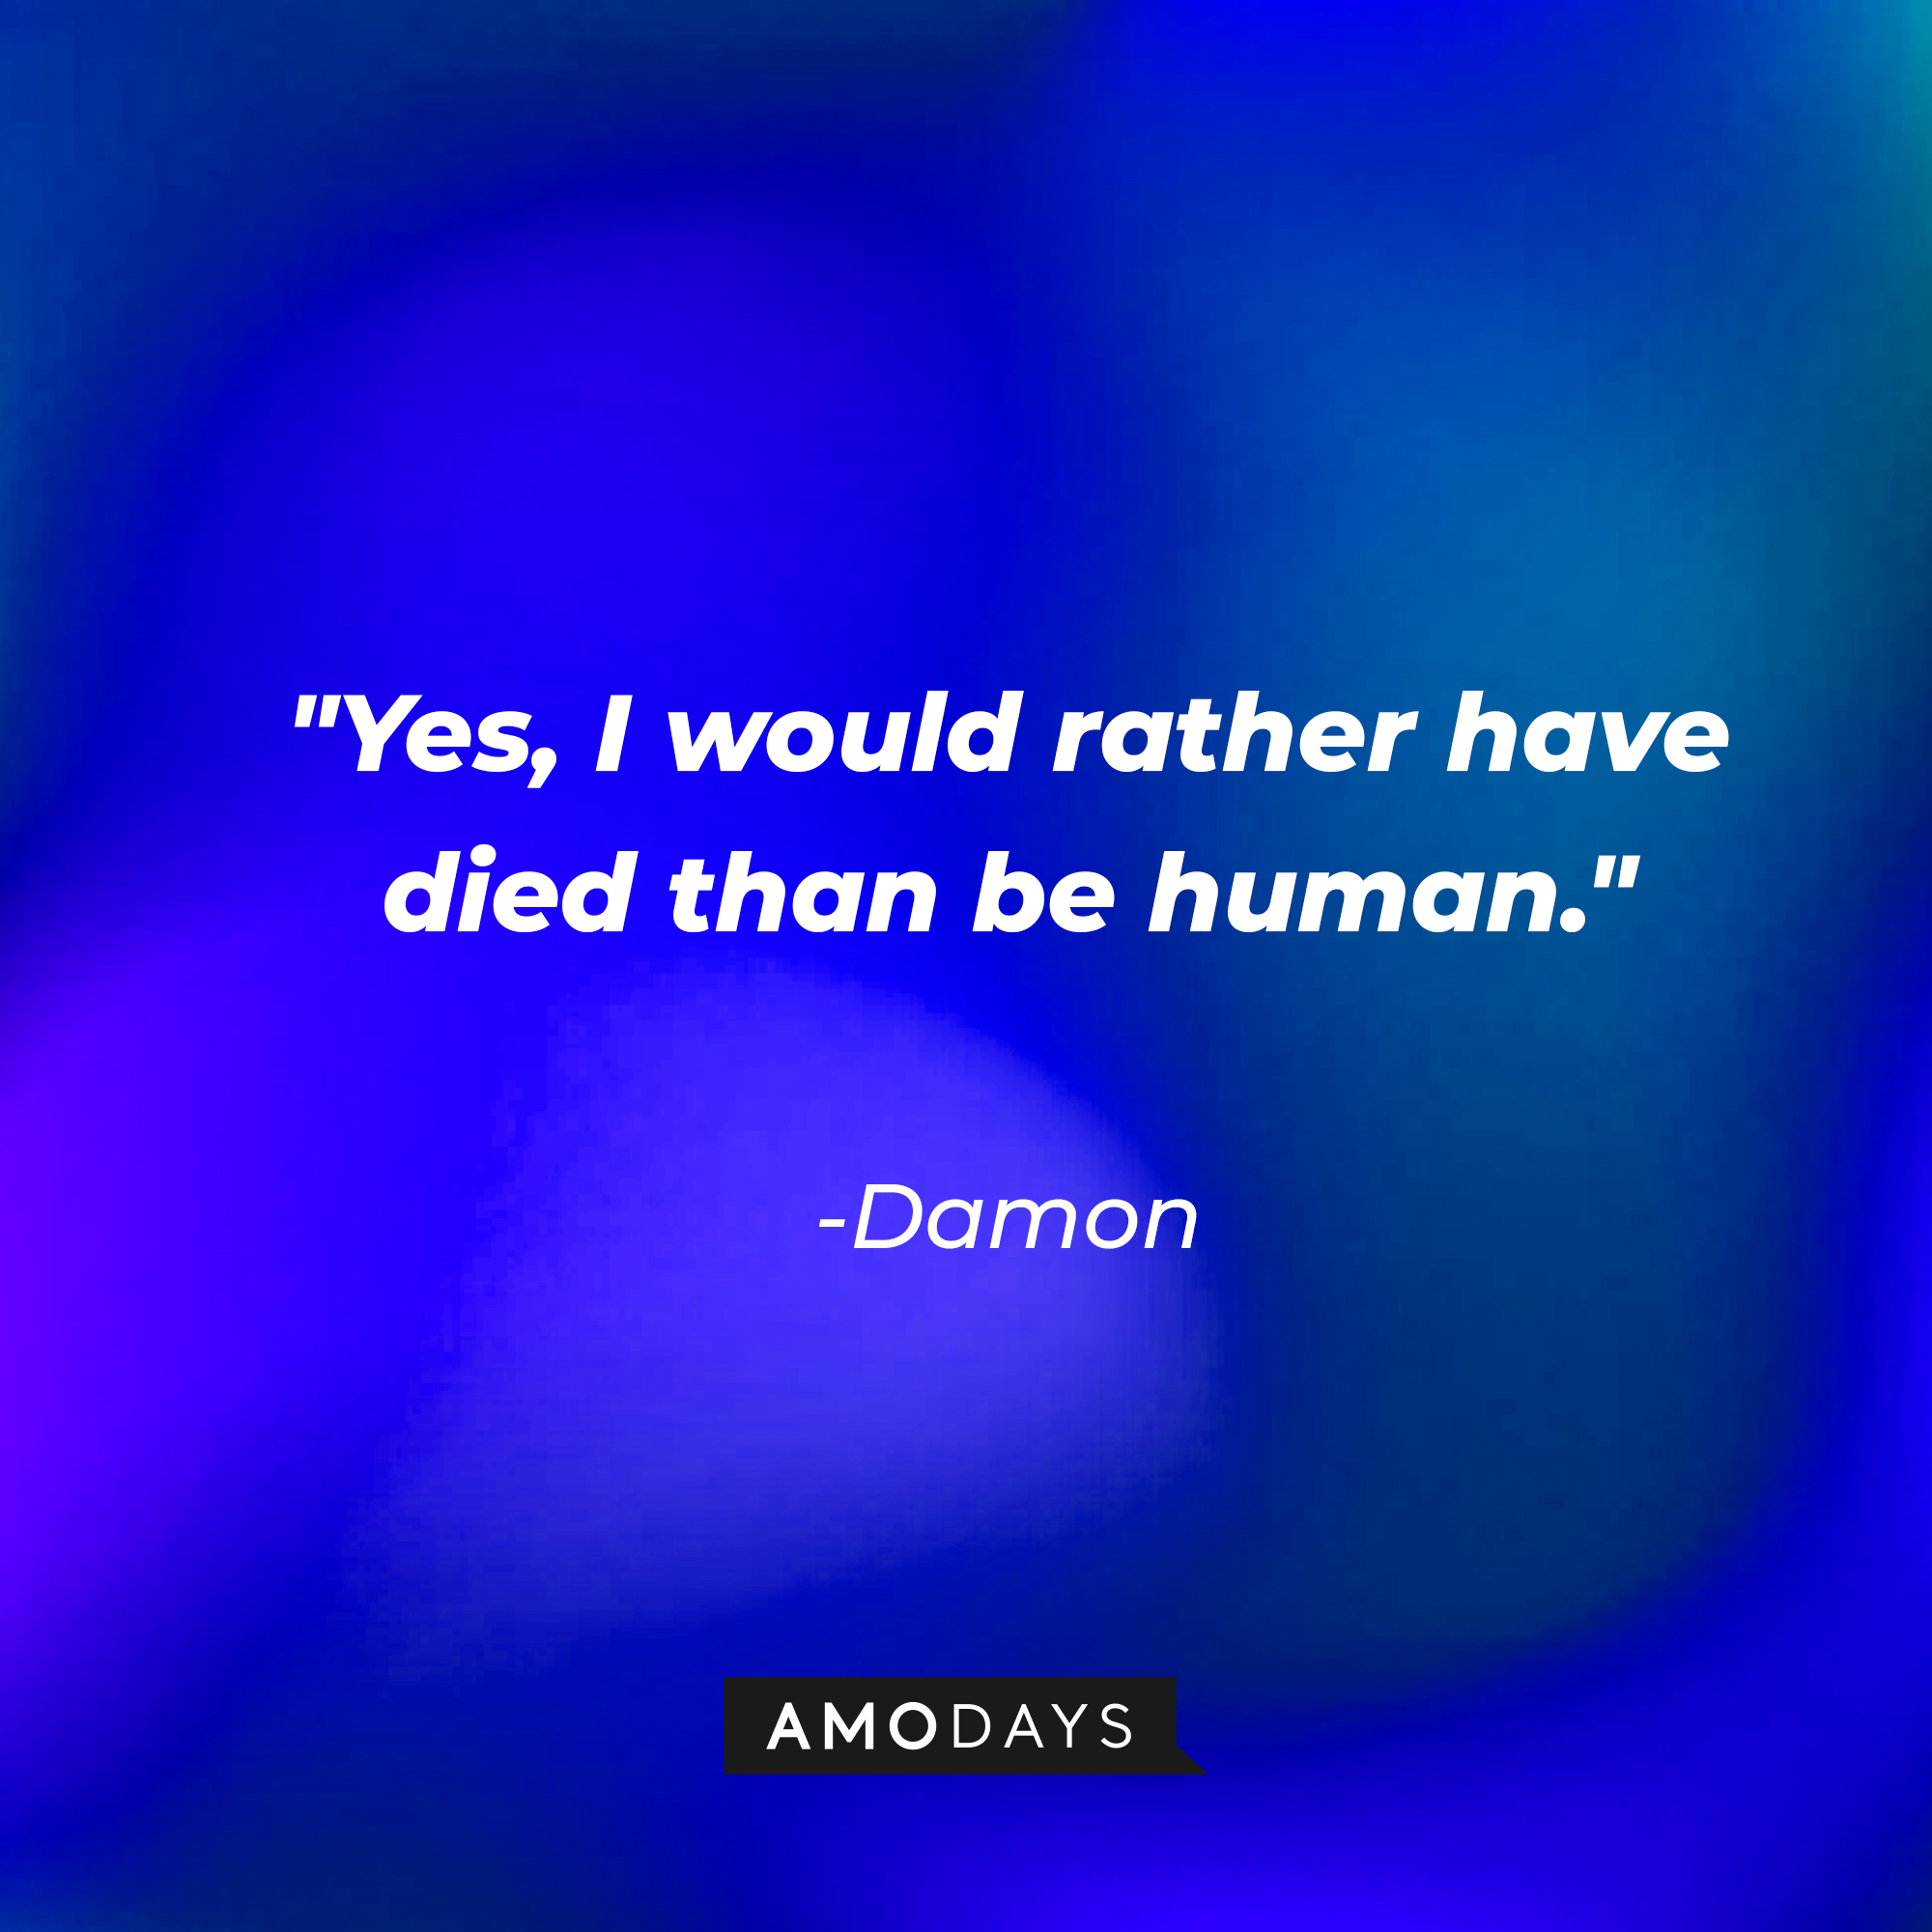 Damon's quote: "Yes, I would rather have died than be human." | Source: Amodays